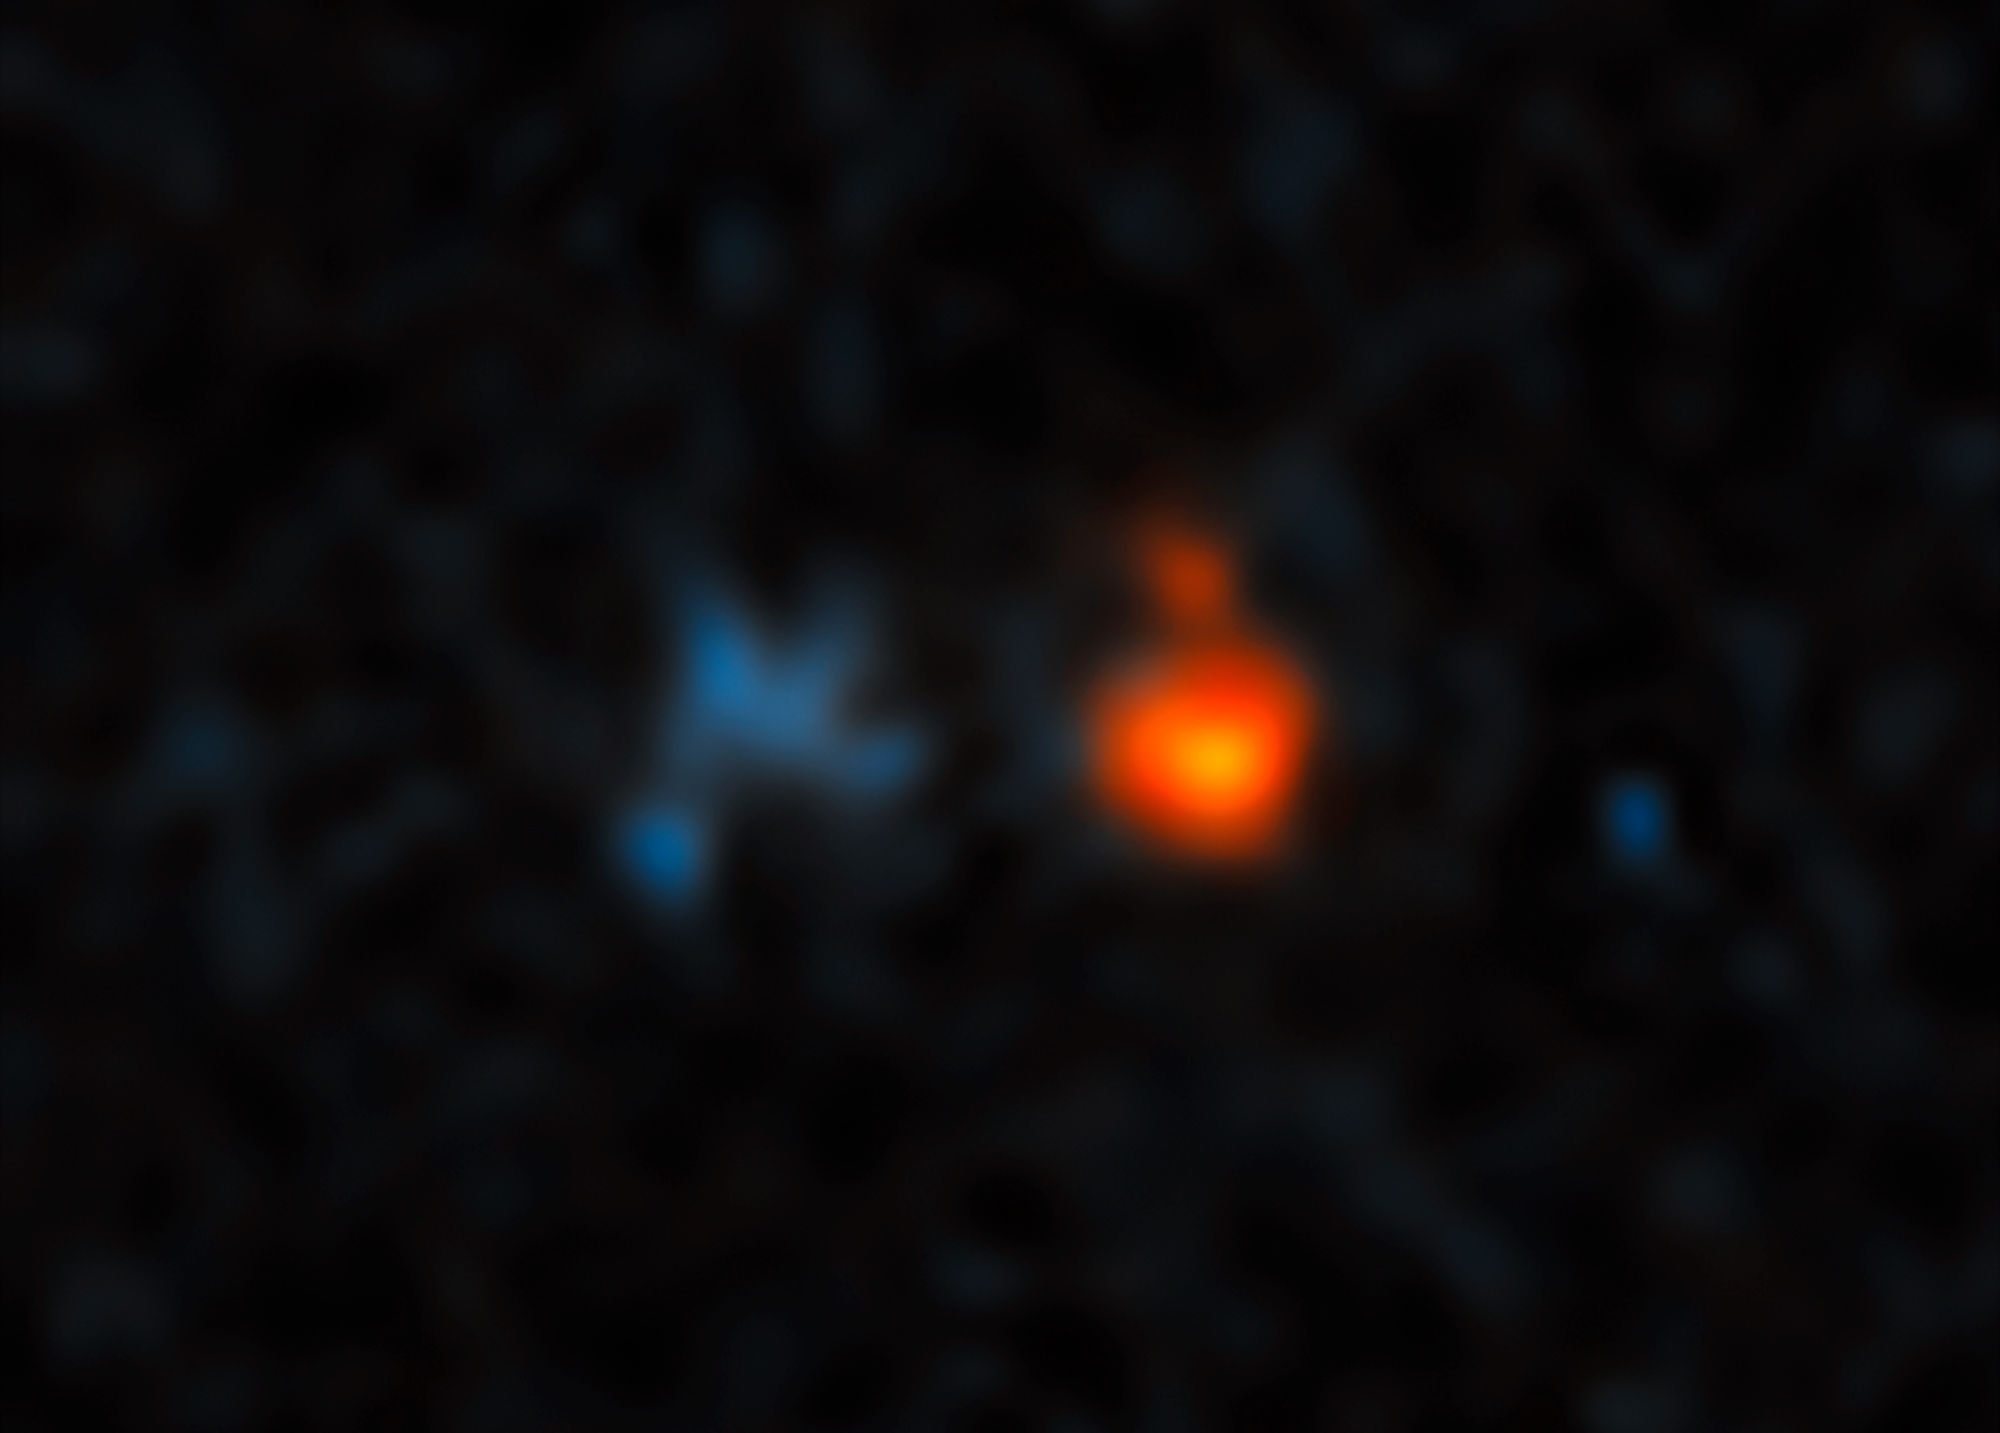 The quasar J043947.08+163415.7 (red) is extremely far away, and its light has been amplified by an intervening galaxy (blue) much closer to Earth. Credit: NASA, ESA, and X. Fan (University of Arizona)